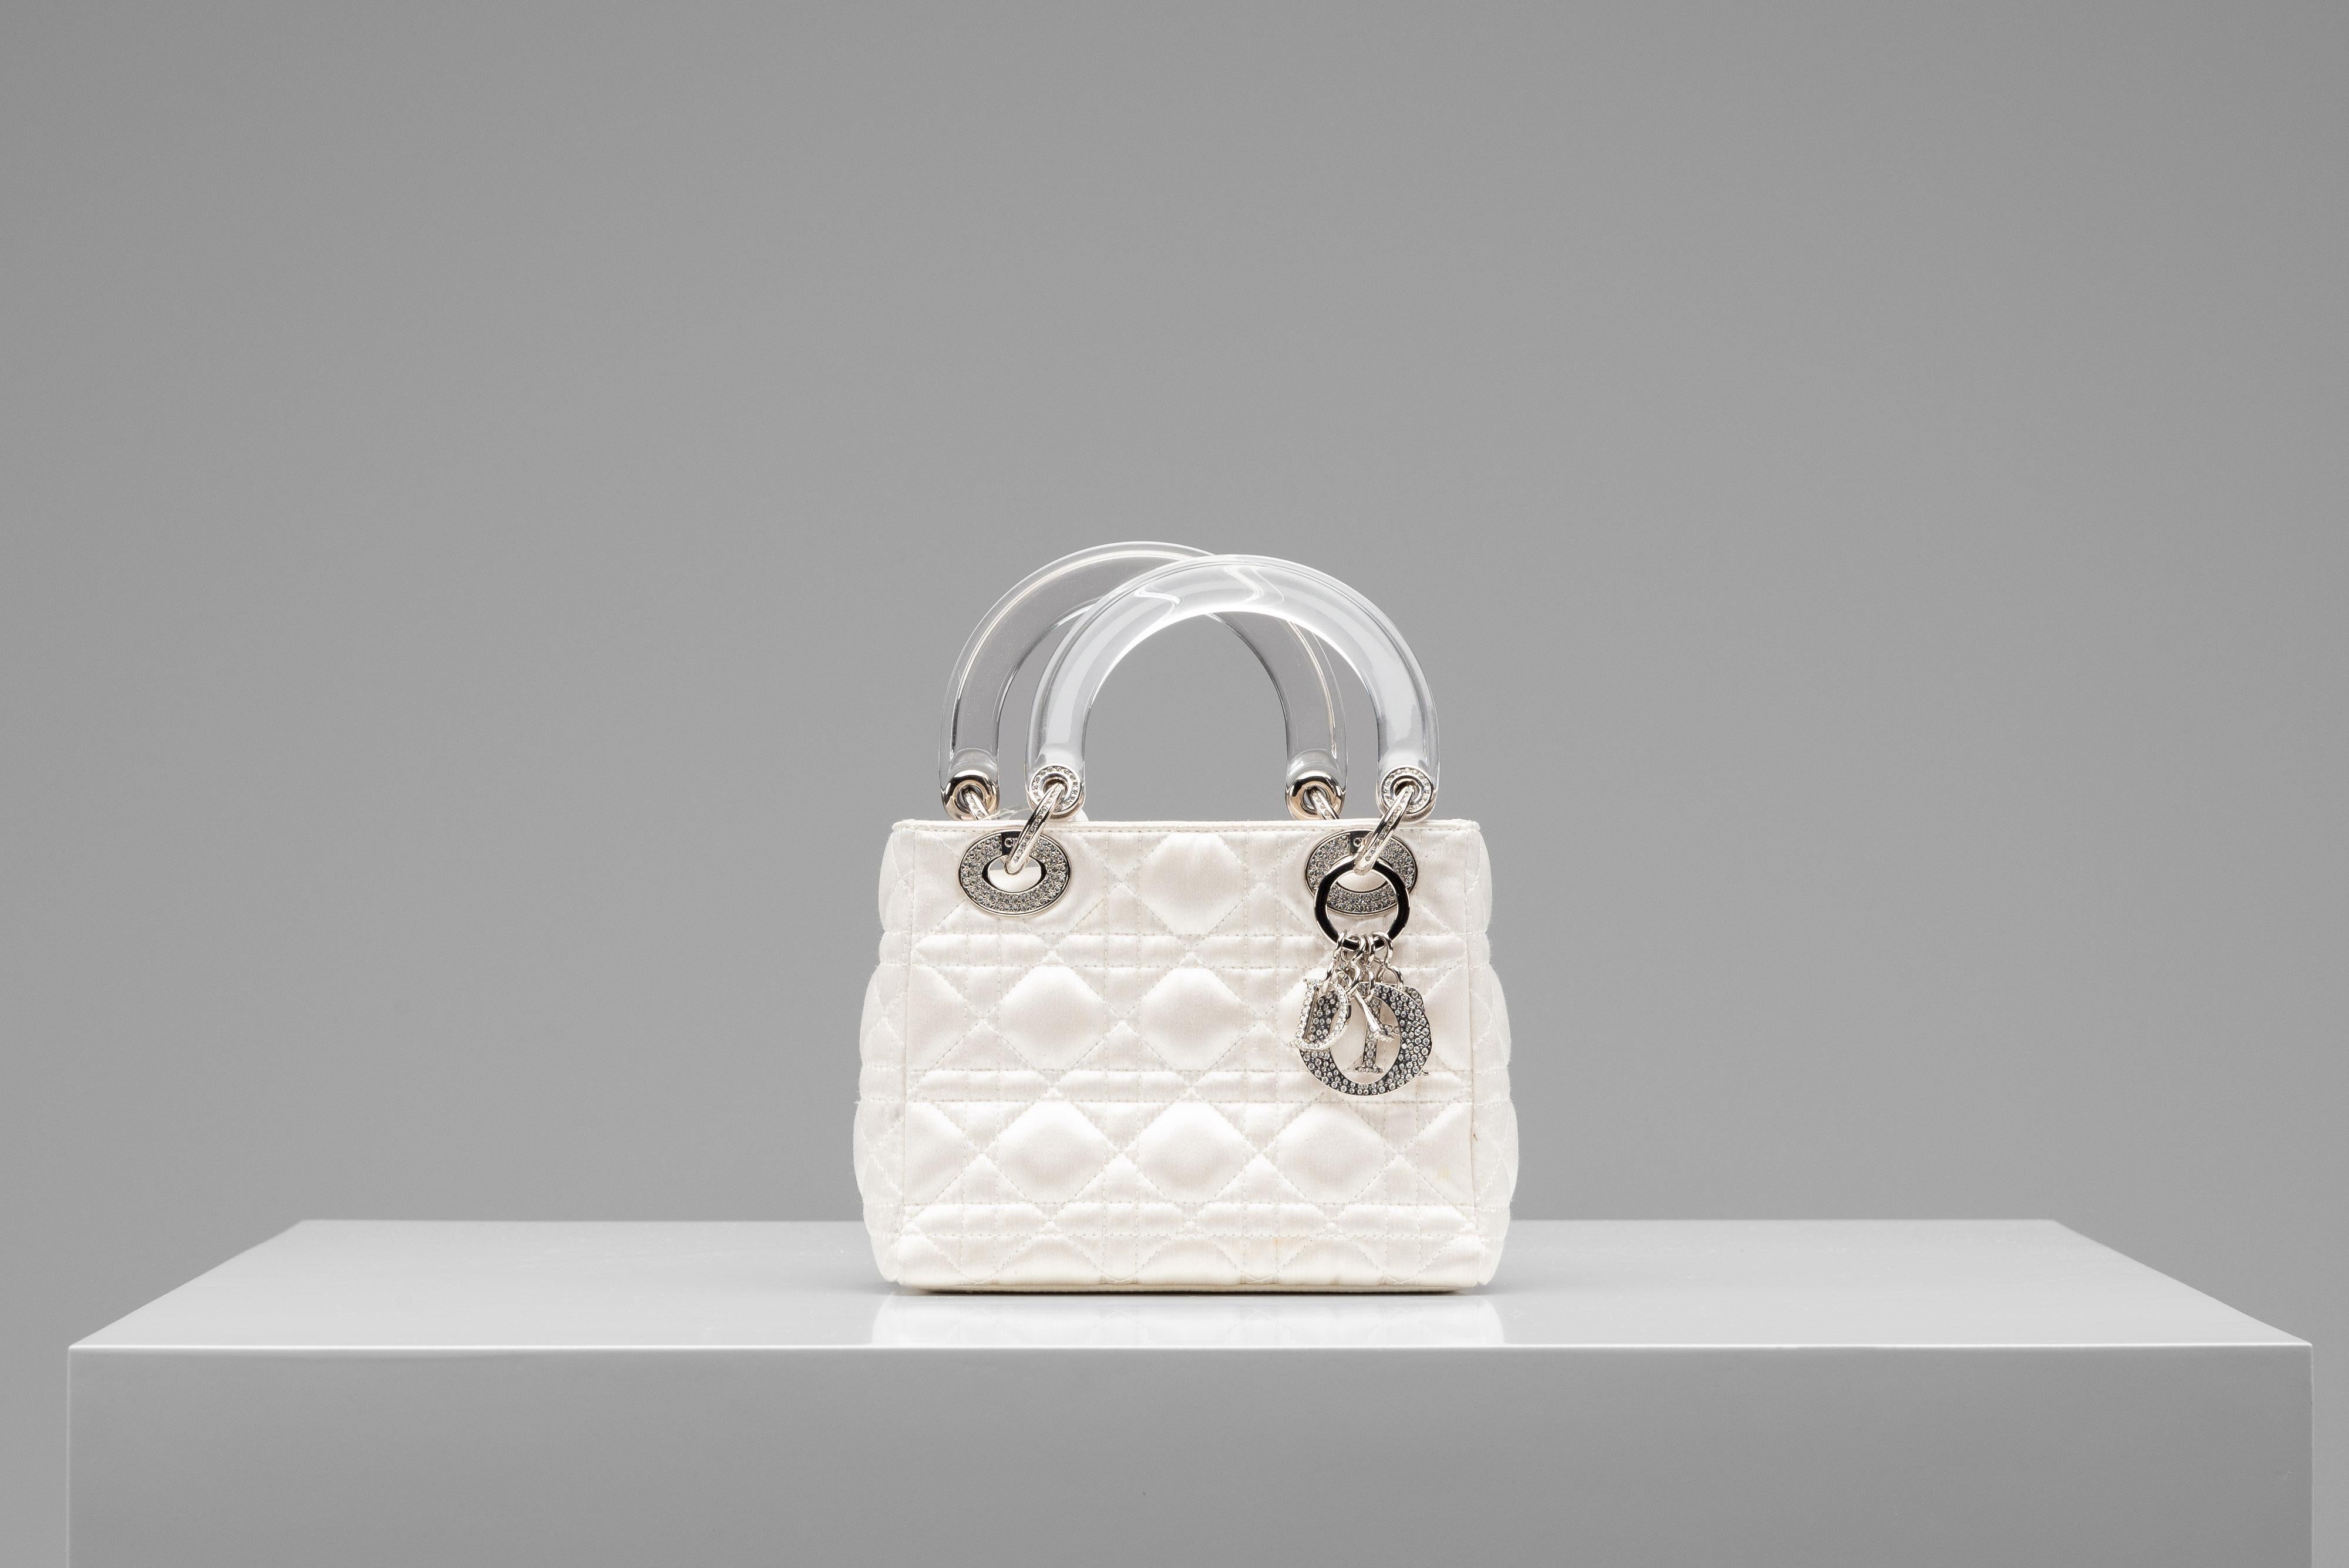 From the collection of SAVINETI we offer this Lady Dior Mini Satin bag:
-    Brand: Dior
-    Model: Lady Dior Mini
-    Color: White/ Pearl
-    Condition: Very Good Condition (spot at the underside of the bag - see images)
-    Materials: White